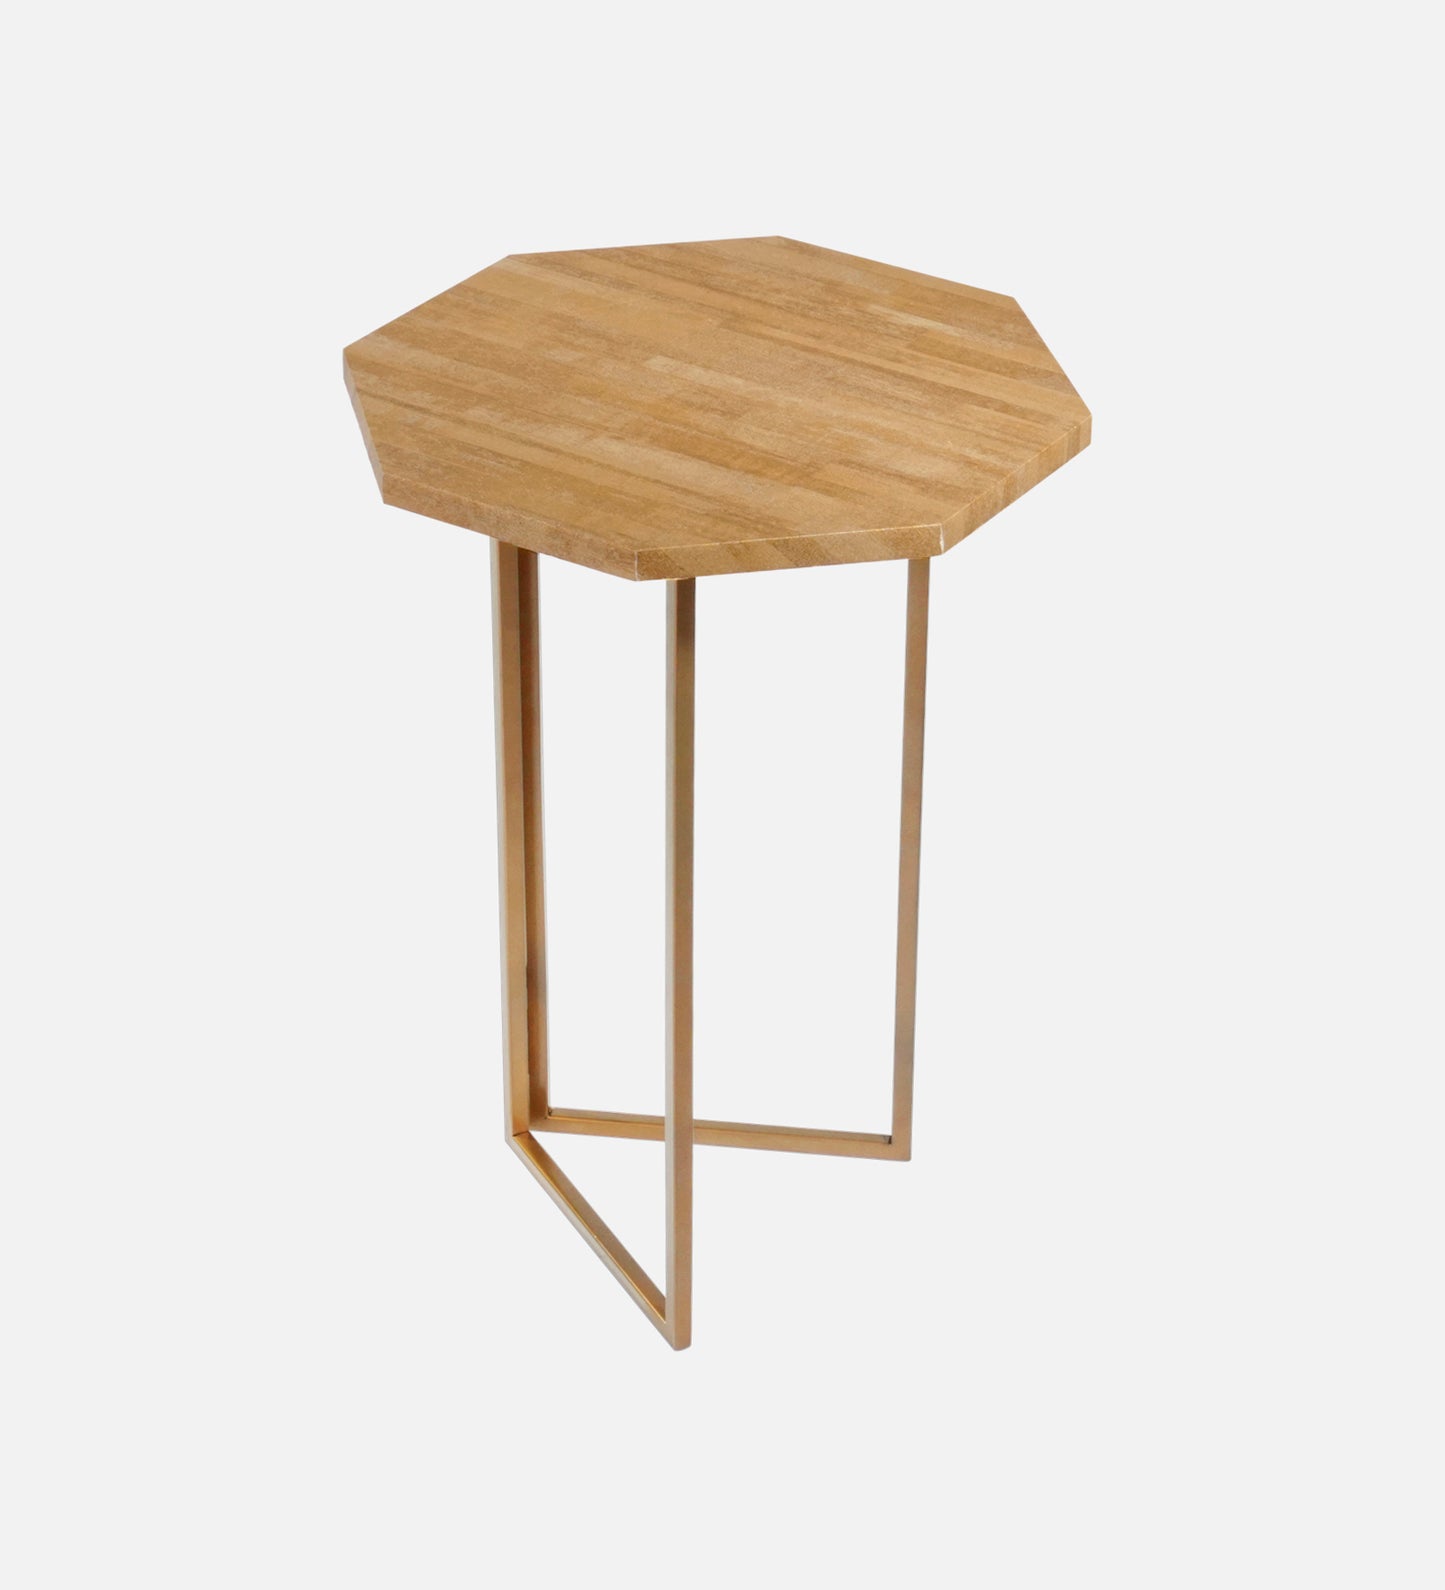 Gold Stacks Octagon Oblique Side Tables, Wooden Tables, Living Room Decor by A Tiny Mistake